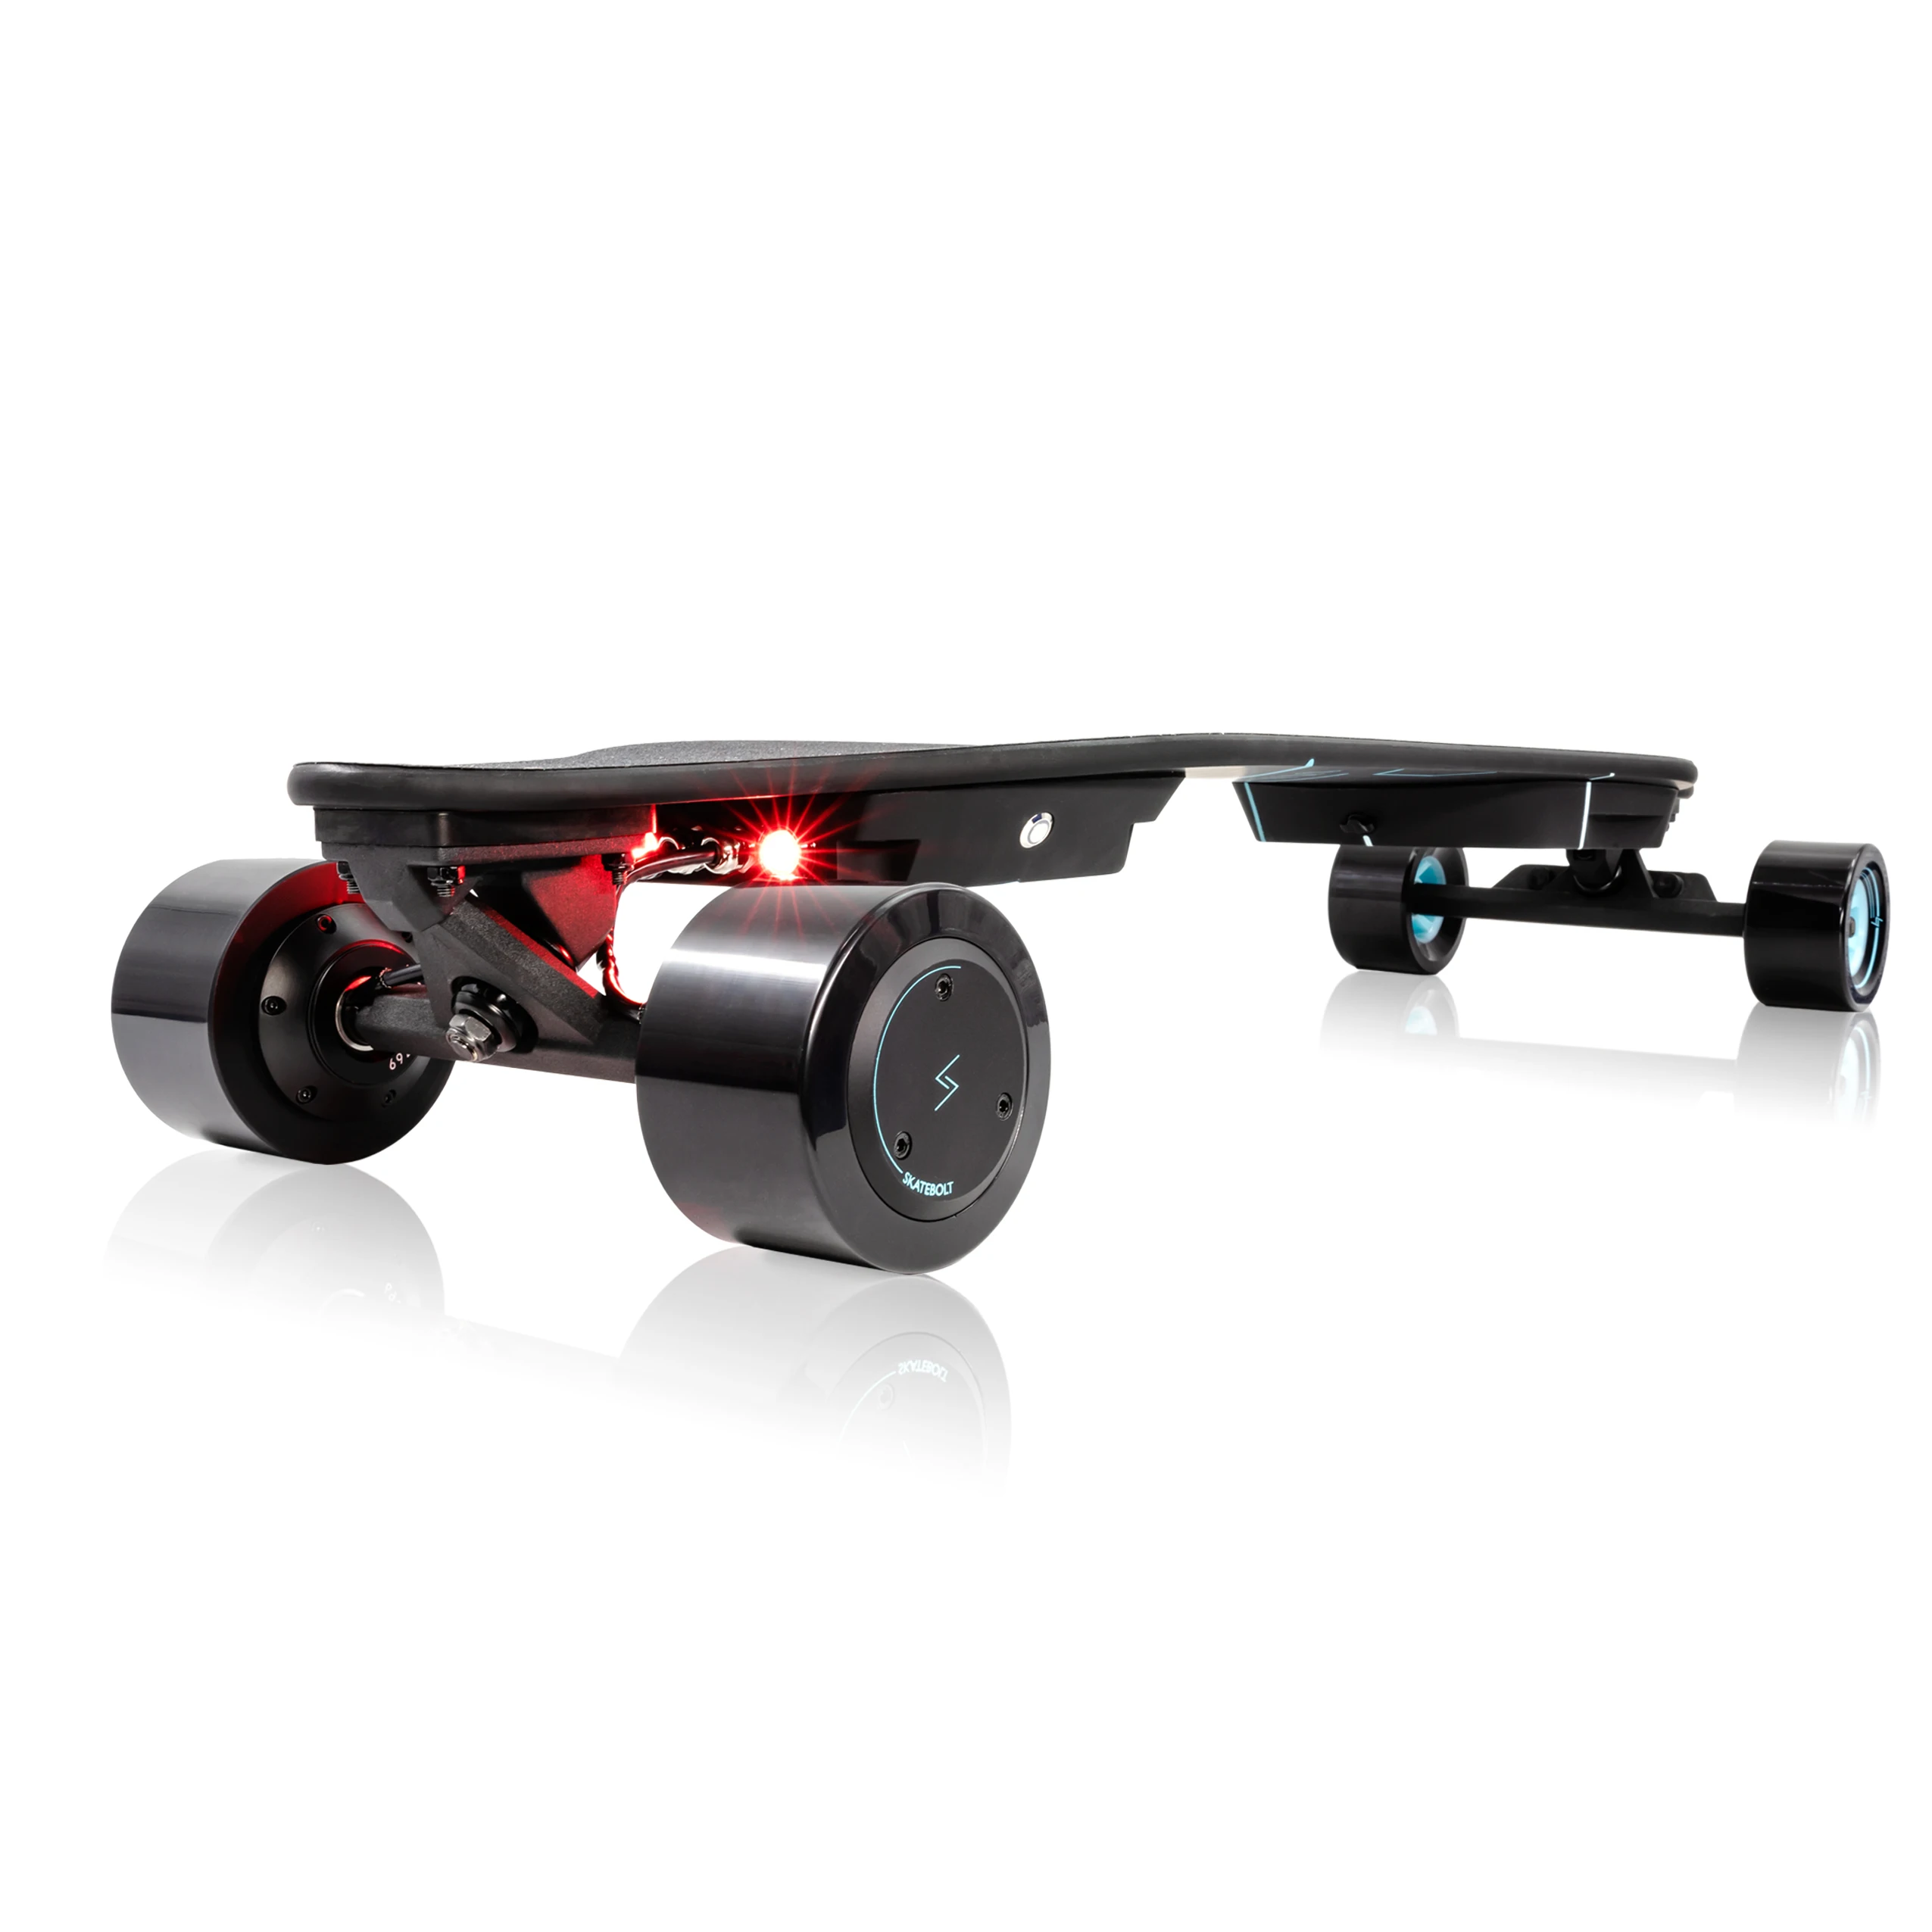 New arrival cheap price portable 28 MPH Top speed SKATEBOLT Electric Skate board with remote Controller for sale, Black